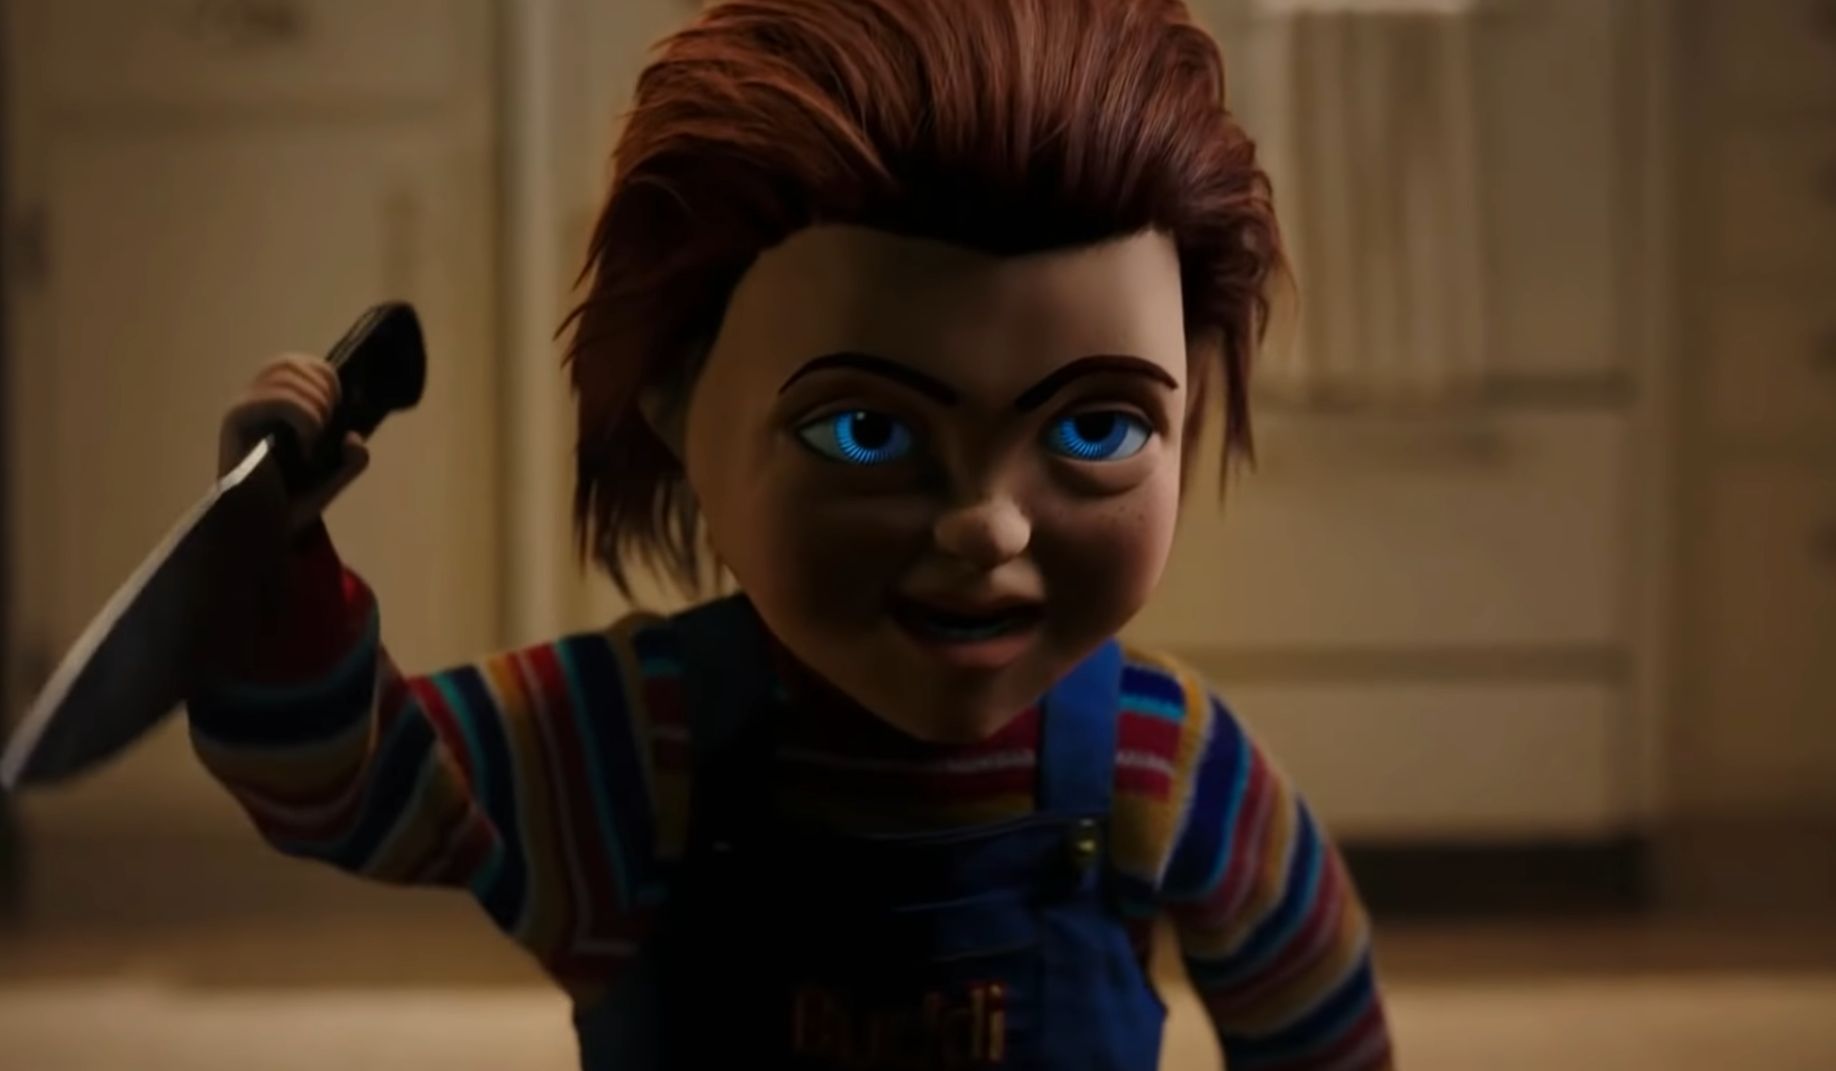 Chucky also retains human-level strength and speed